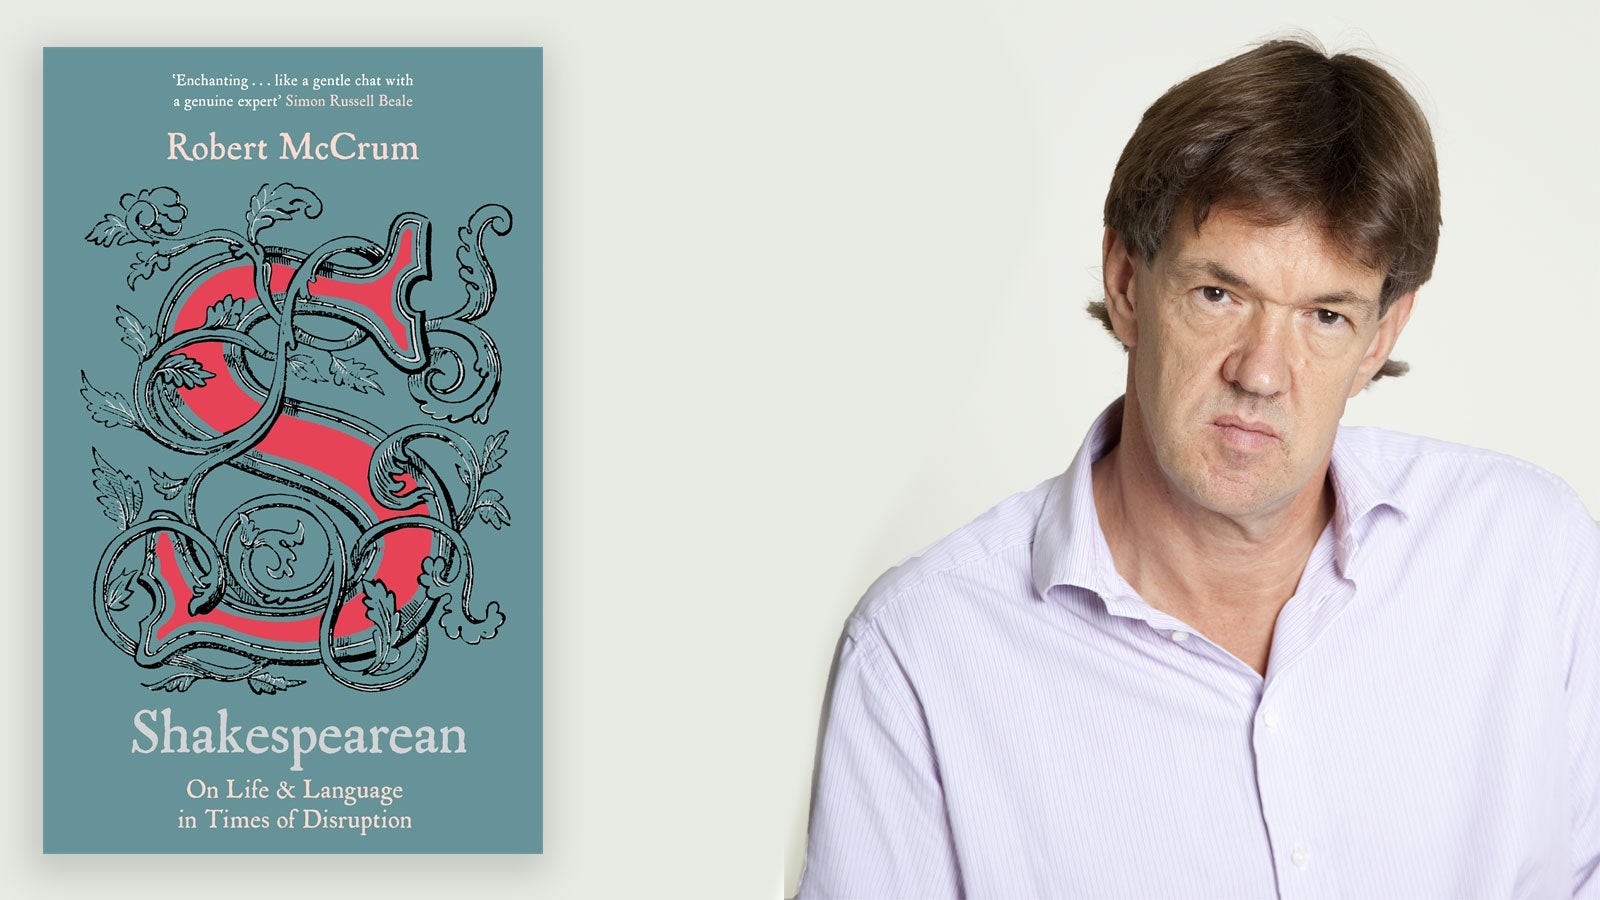 Robert McCrum and the cover of Shakespearean